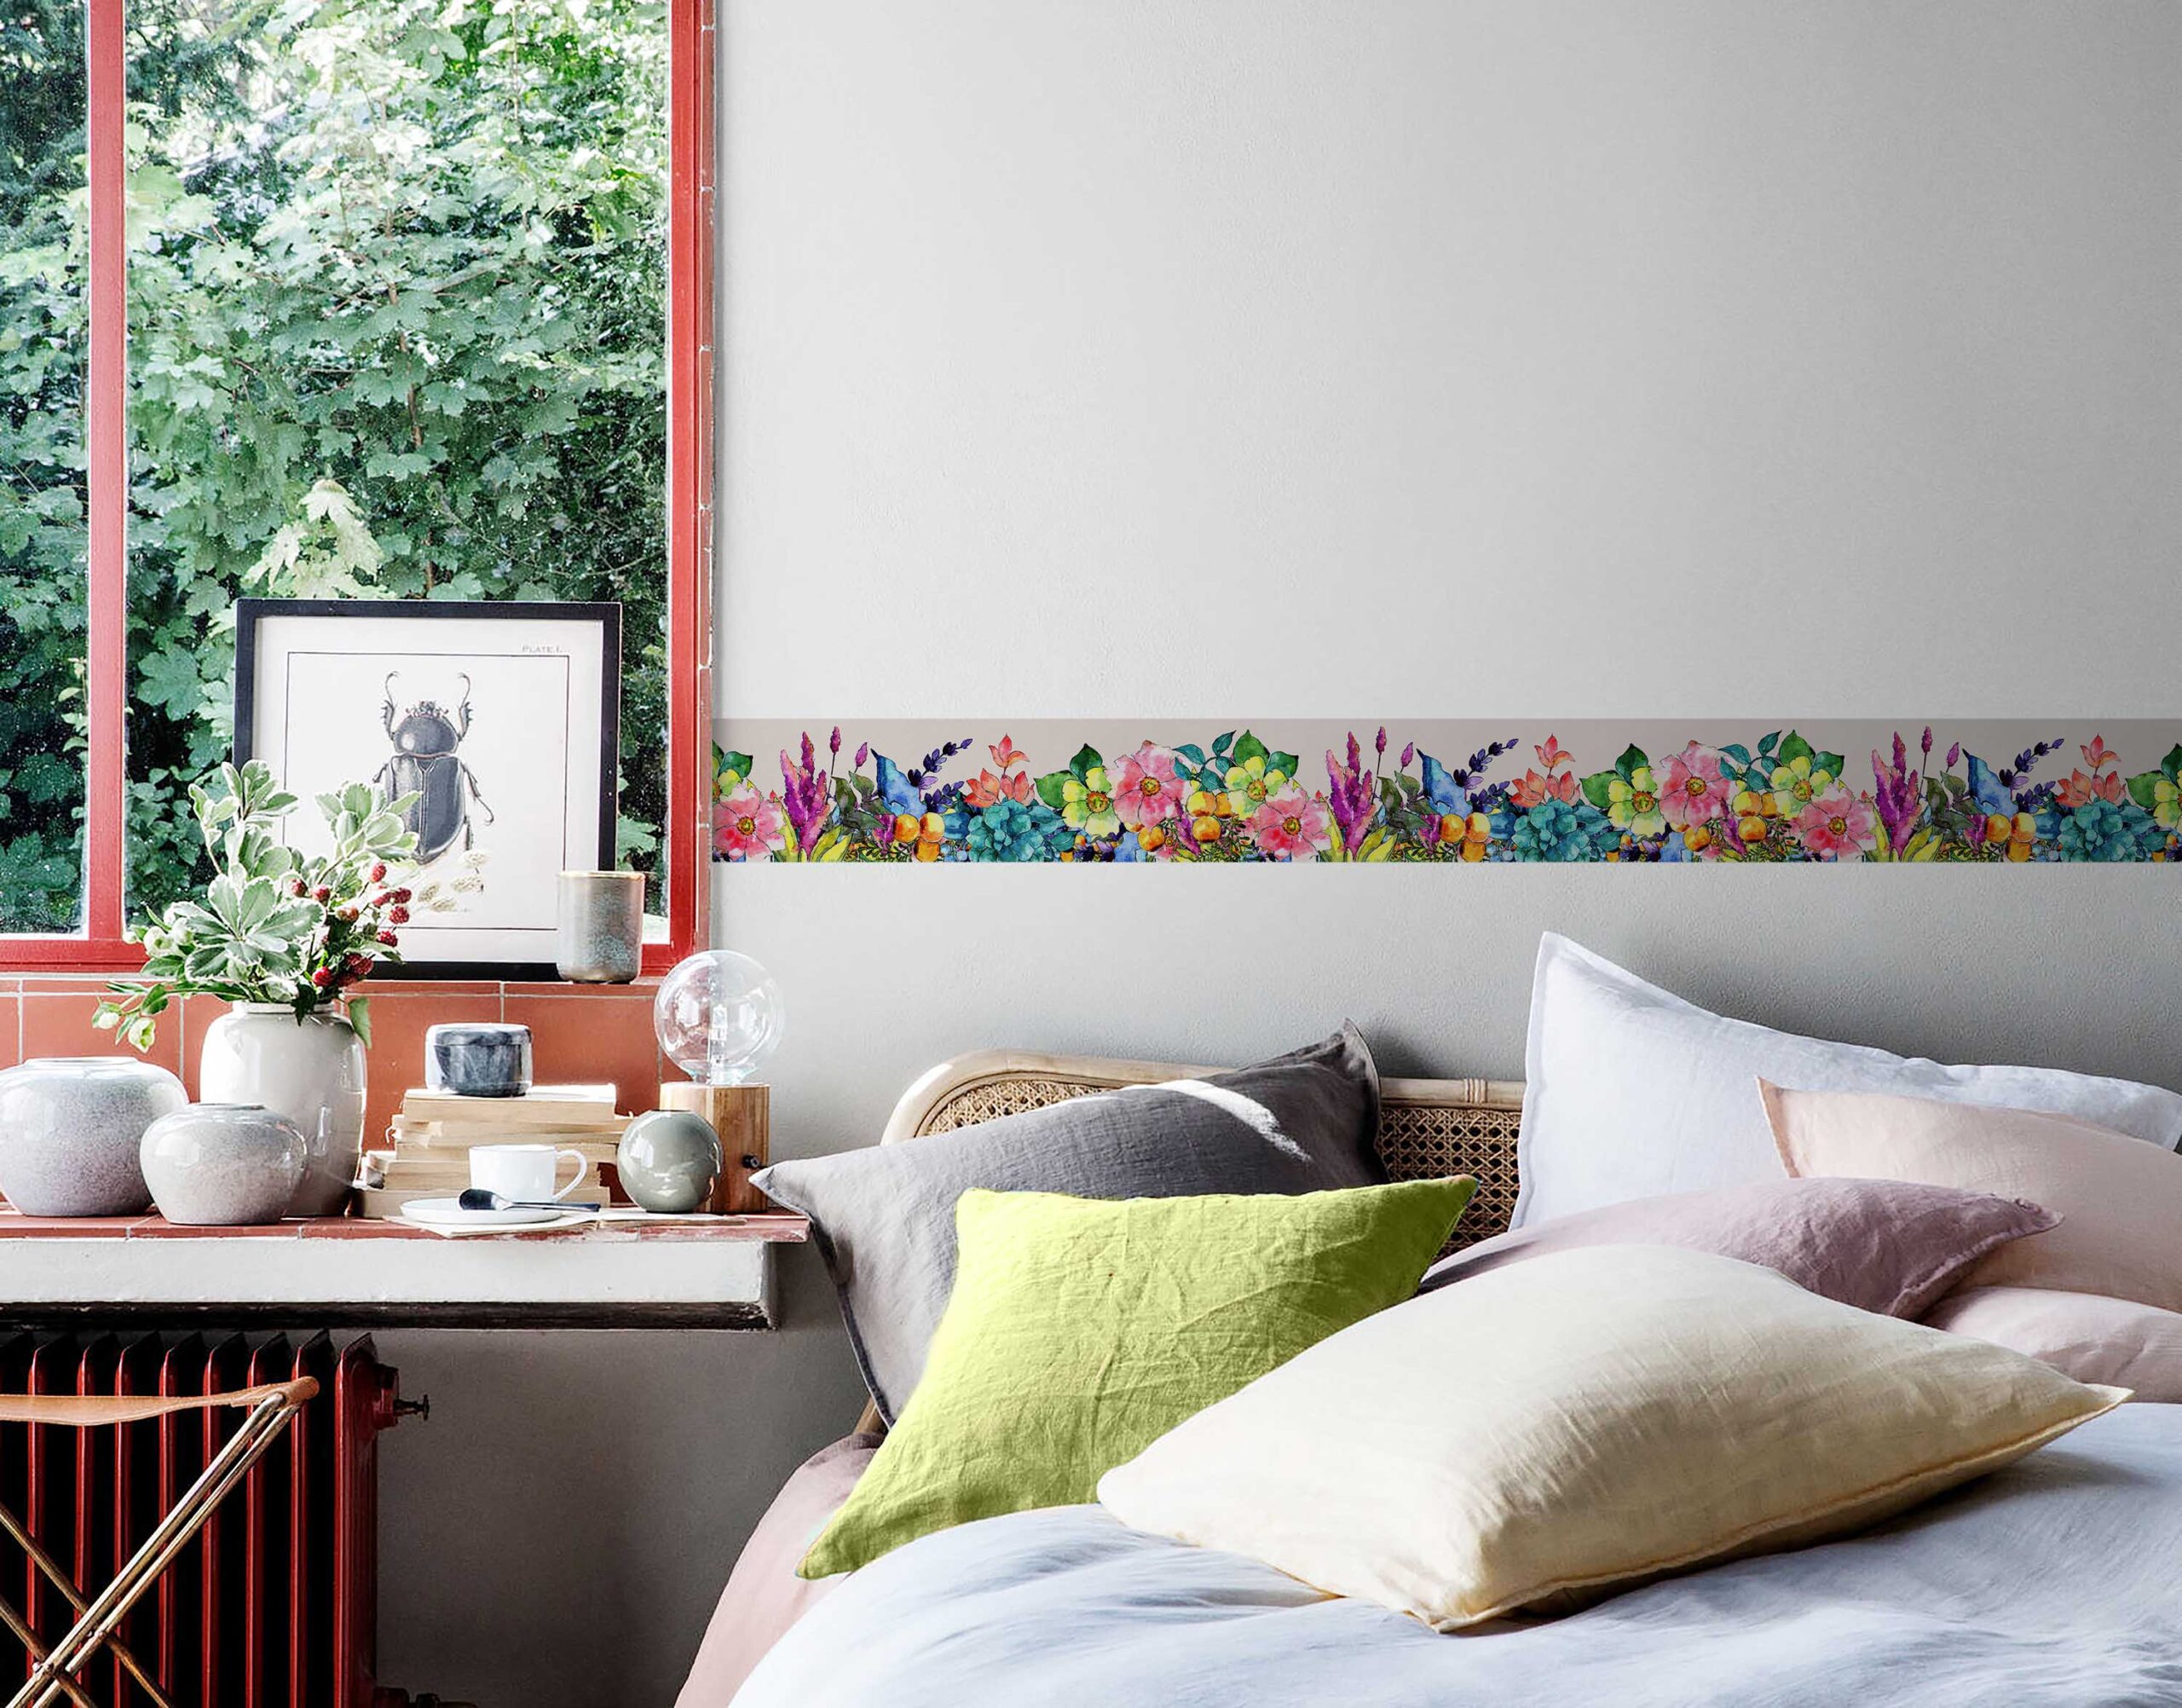 Orchid Multicolor Flowers Painted Wall Border Sticker